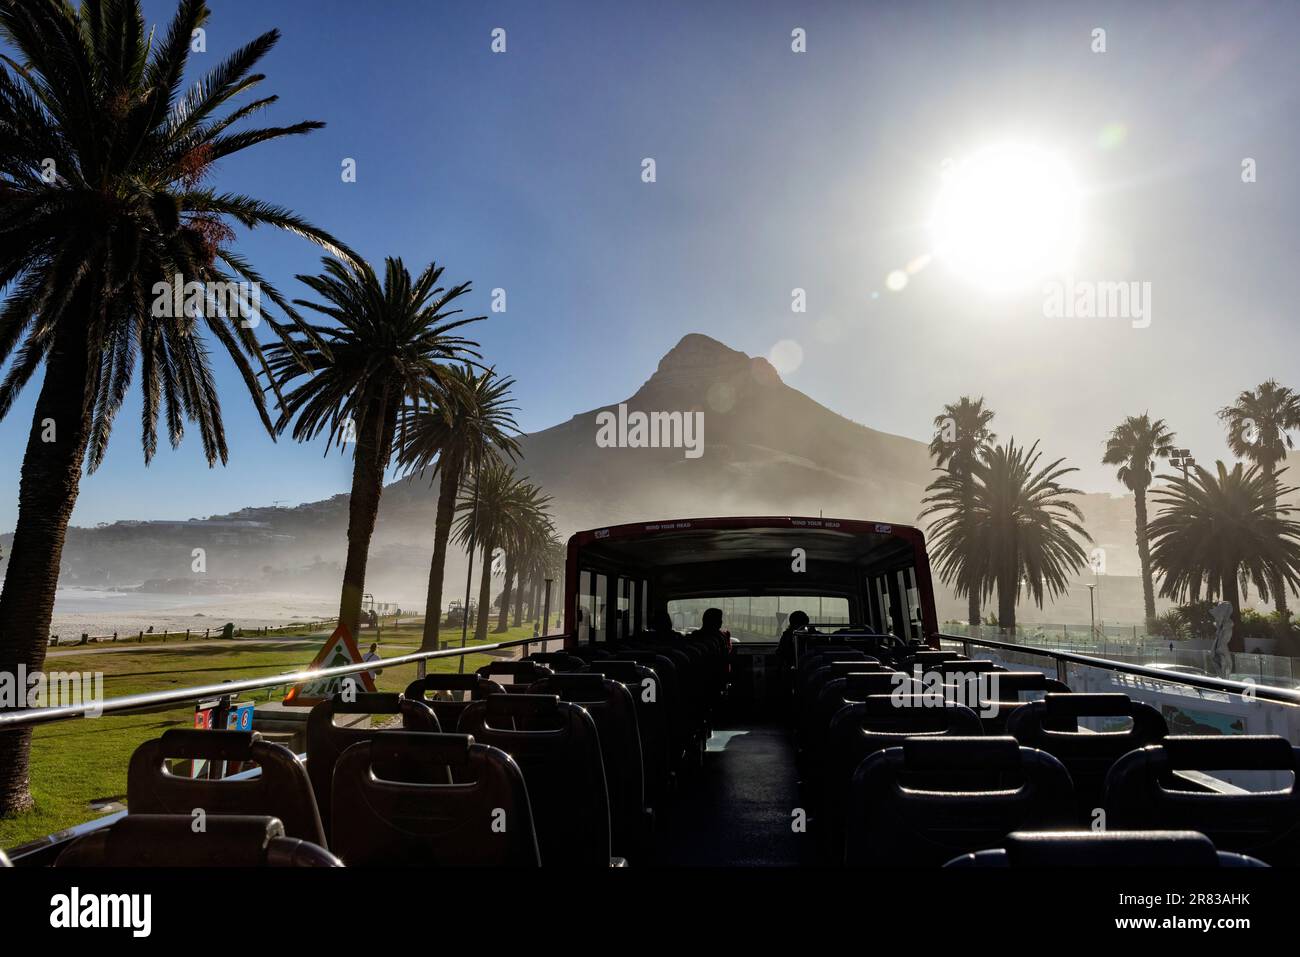 View from Hop On, Hop Off Red Bus on Victoria Road in Camps Bay with Lion's Head mountain in the background - Cape Town, South Africa Stock Photo